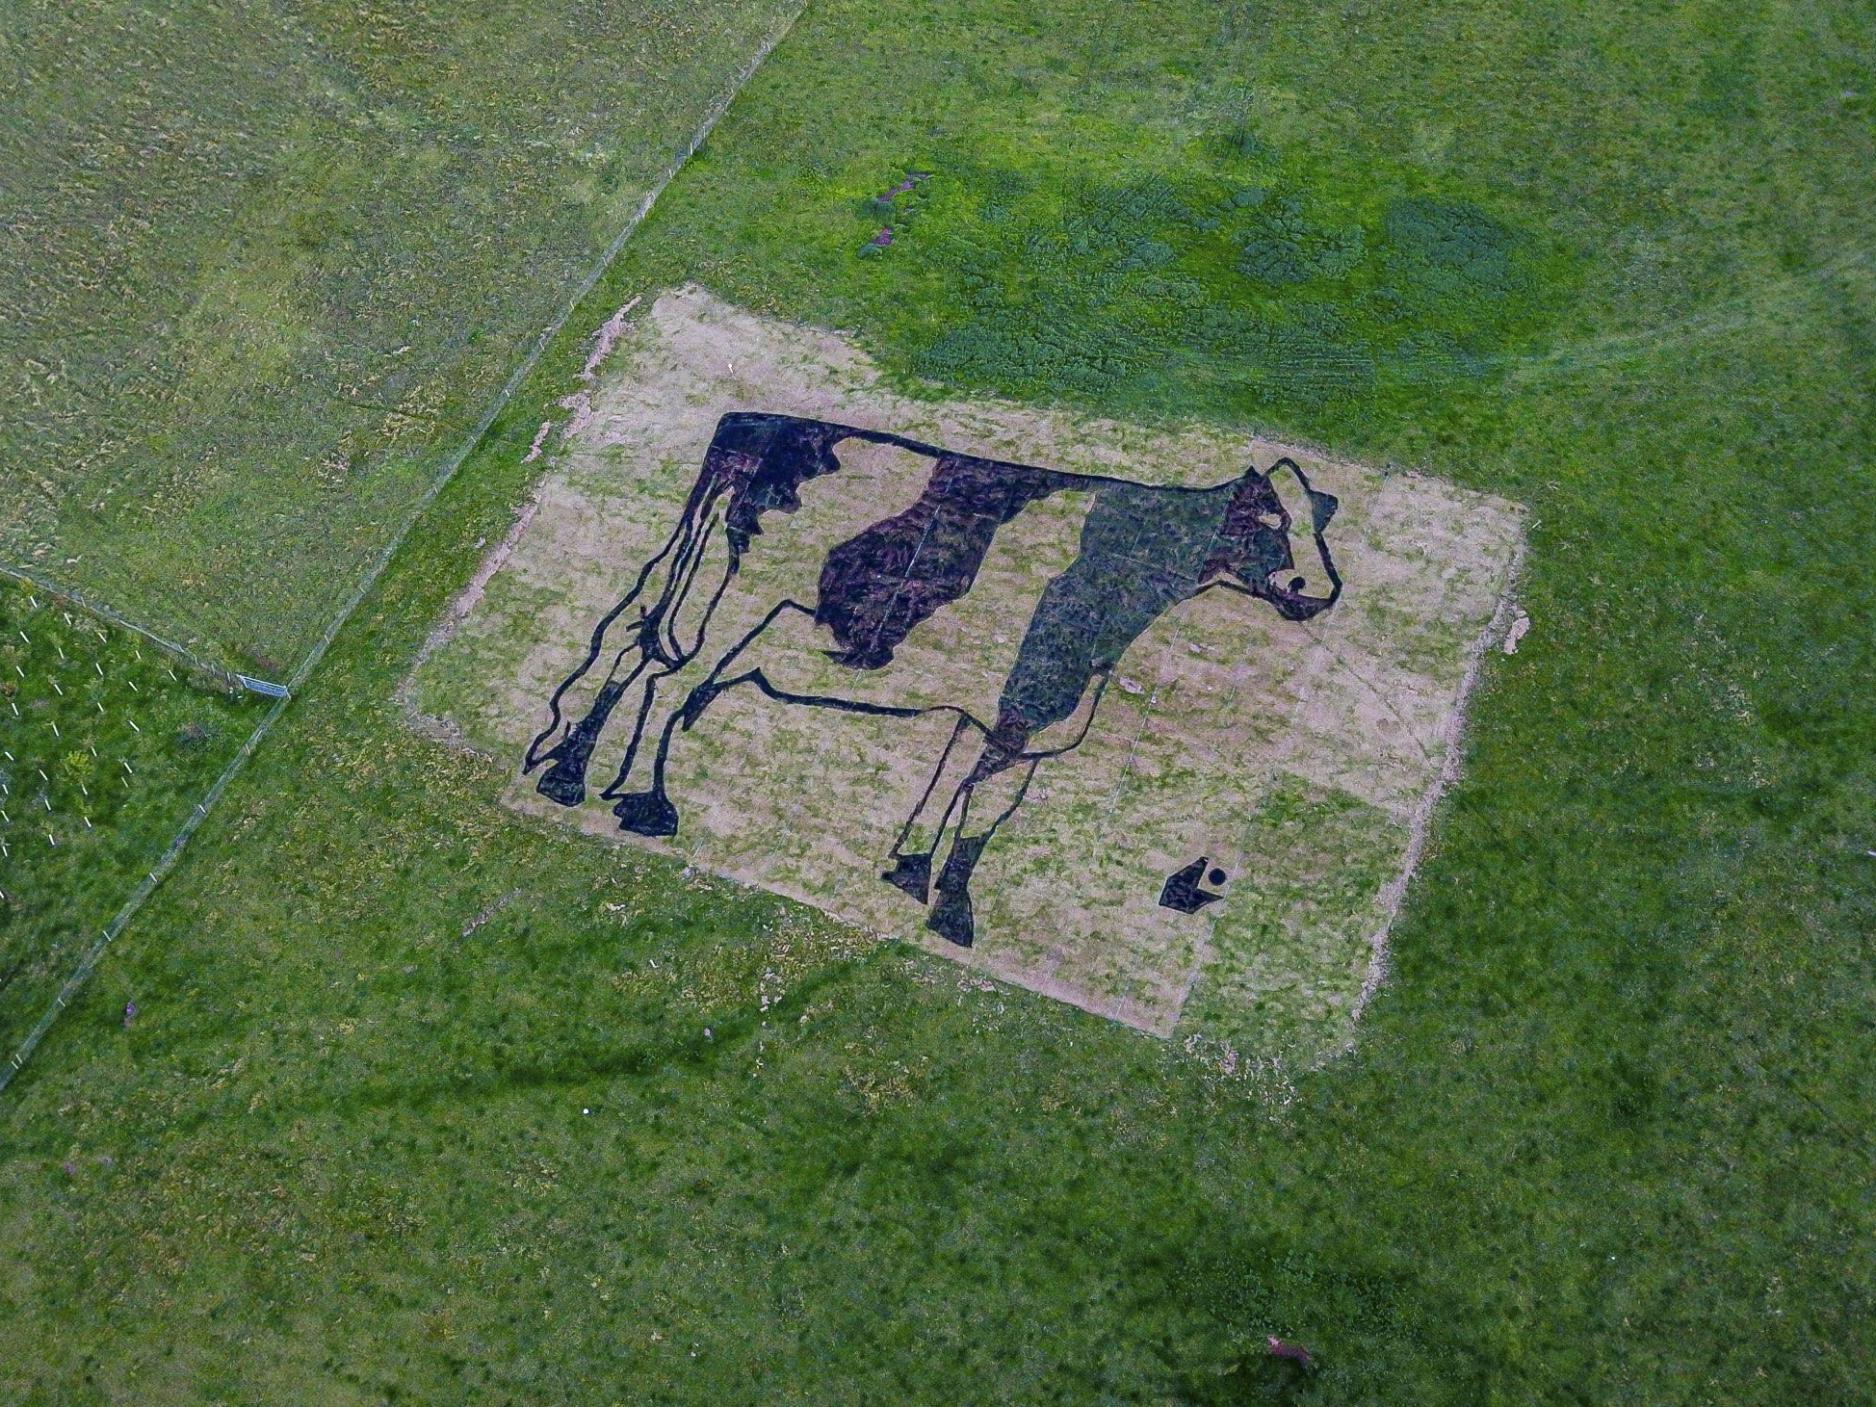 Artists Create Giant Cow Out Of Manure In Somerset Countryside